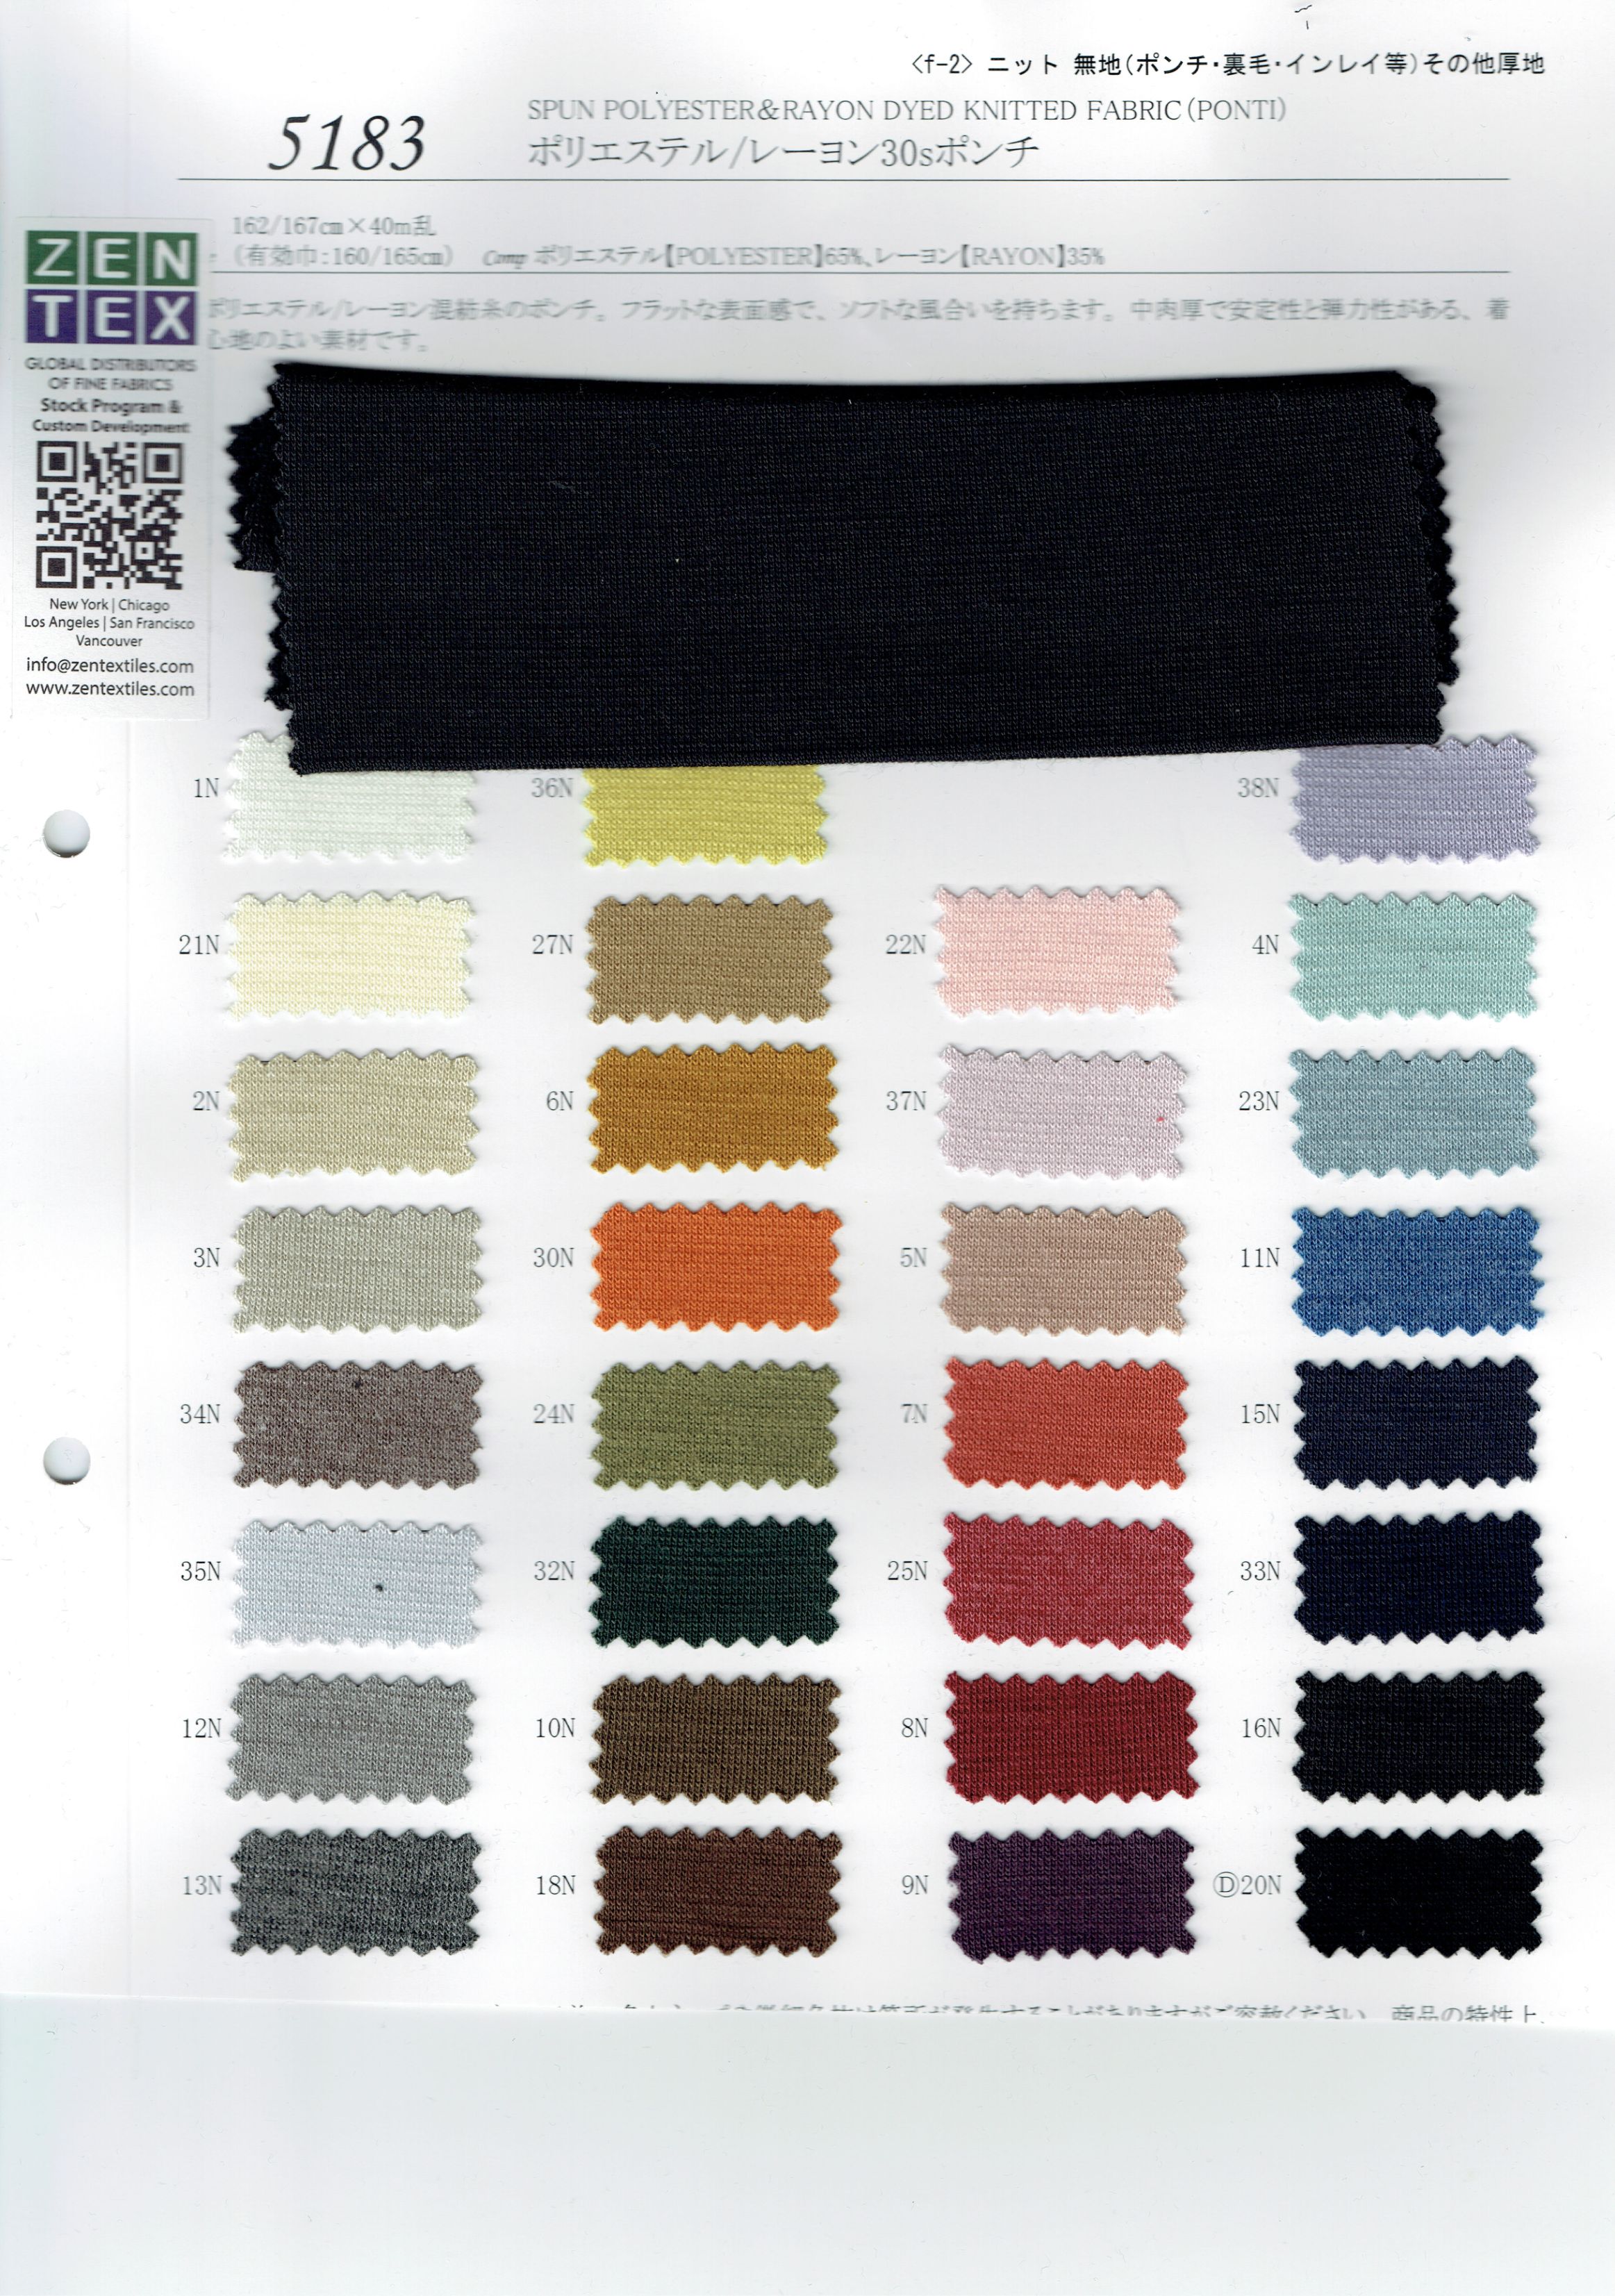 View POLYESTER65/RAYON35SPUN & DYED KNITTED FABRIC[PONTI]SPUN & DYED KNITTED FABRIC[PONTI]